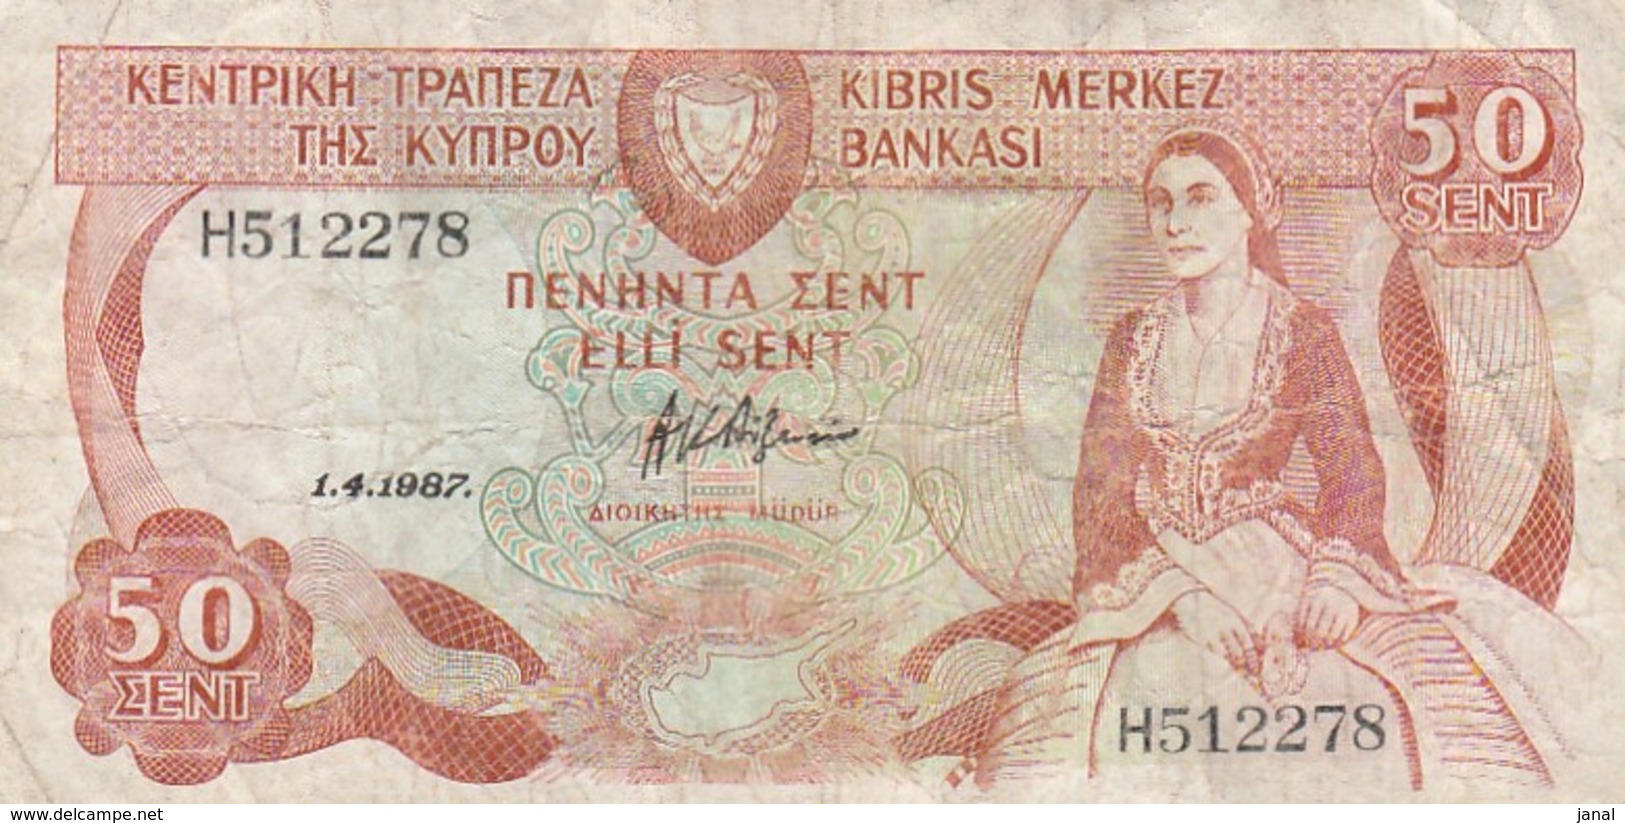 CHYPRE - 50 SENT -BANK OF CYPRUS - H512278 - 1.4.1987. - Cipro